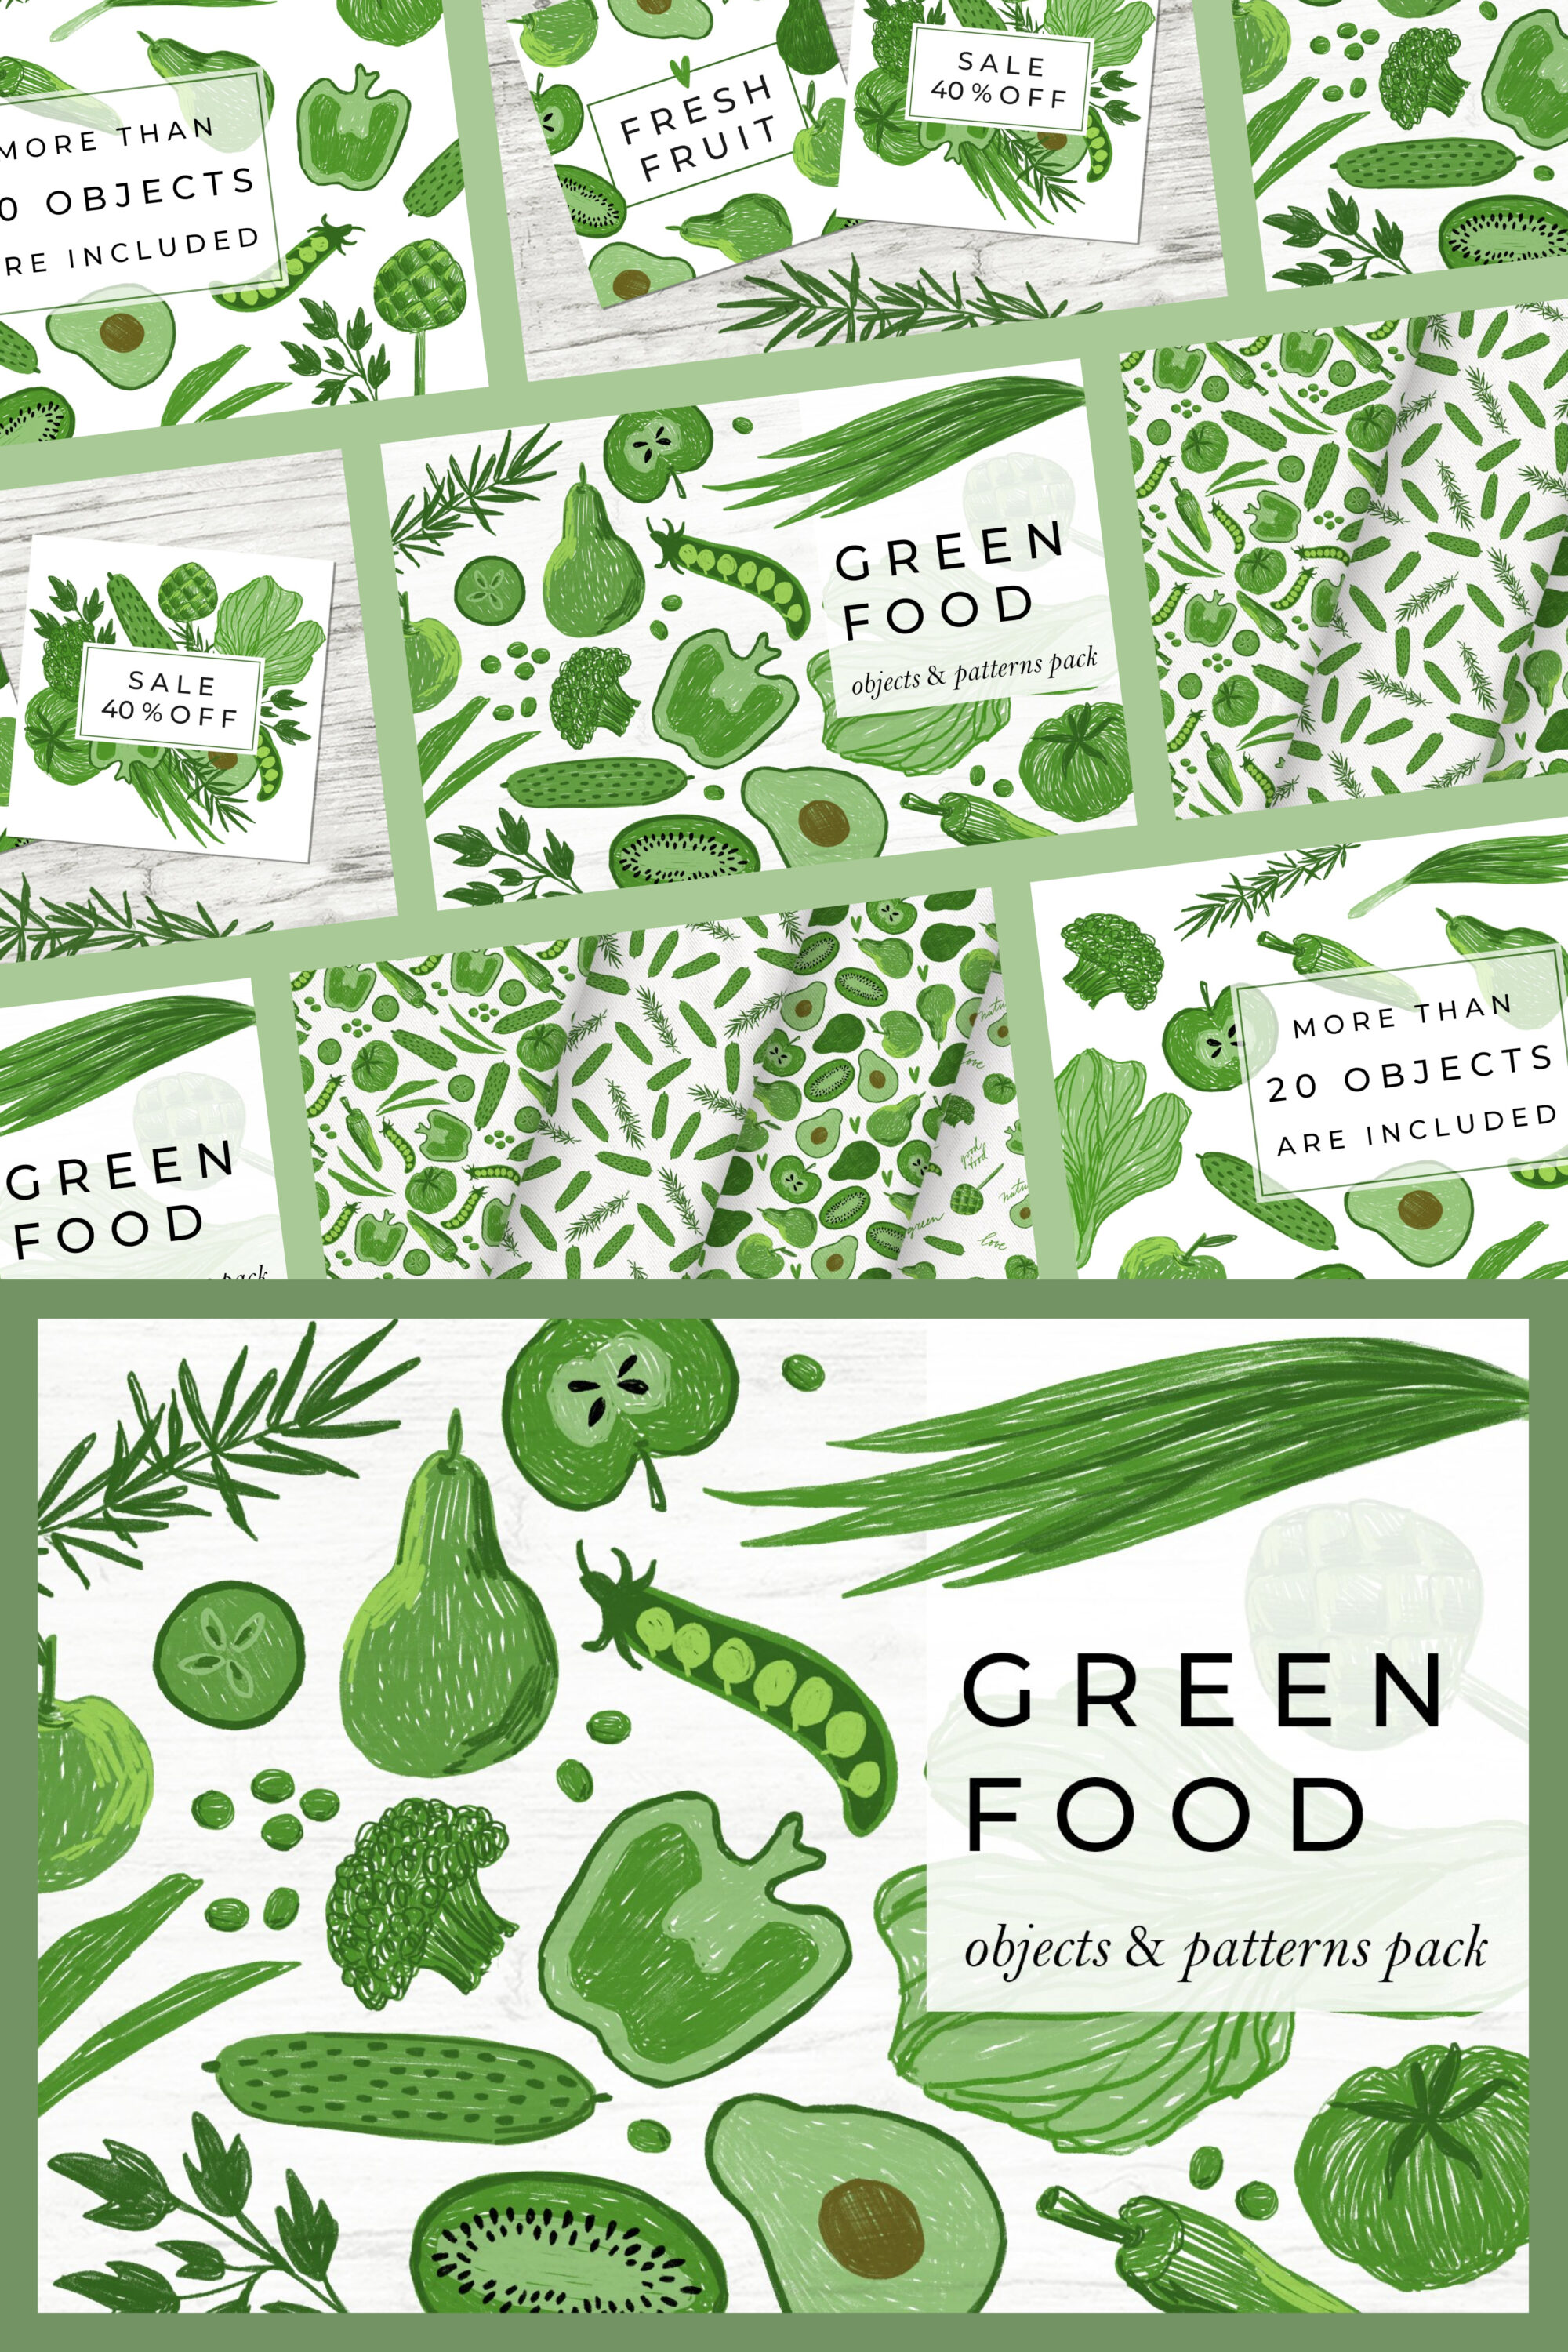 Green food – objects and patterns pack of pinterest.